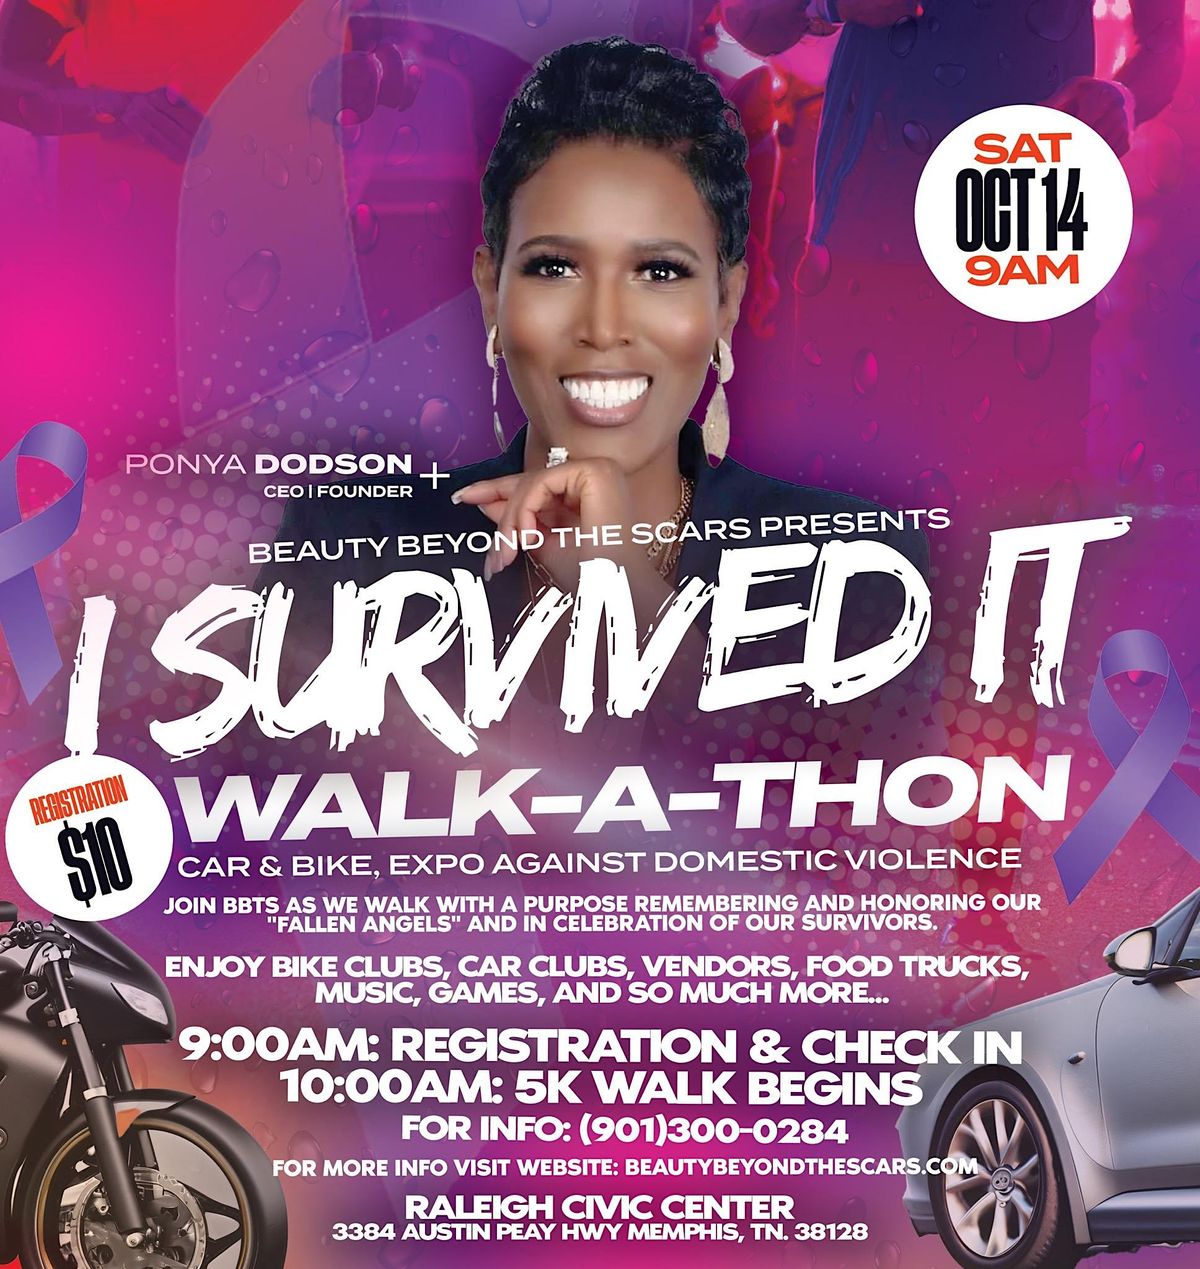 Beauty Beyond the Scars presents "I Survived It Walkathon"  Car & Bike Expo